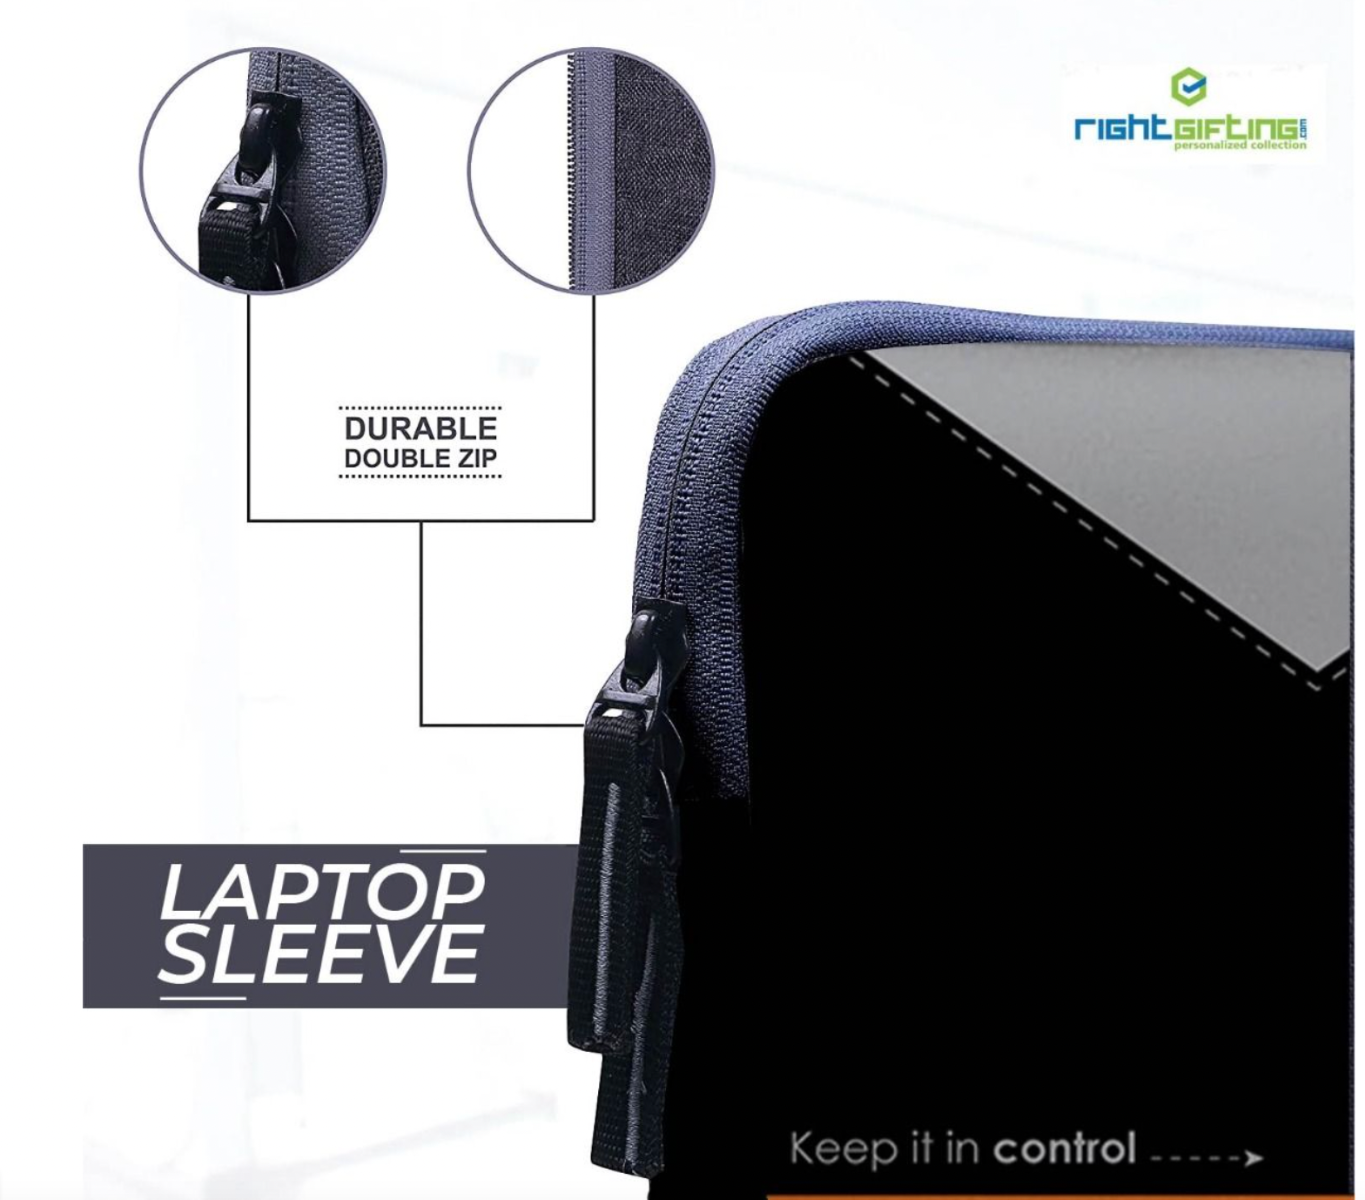 Top Features of Rightgifting Laptop Sleeve